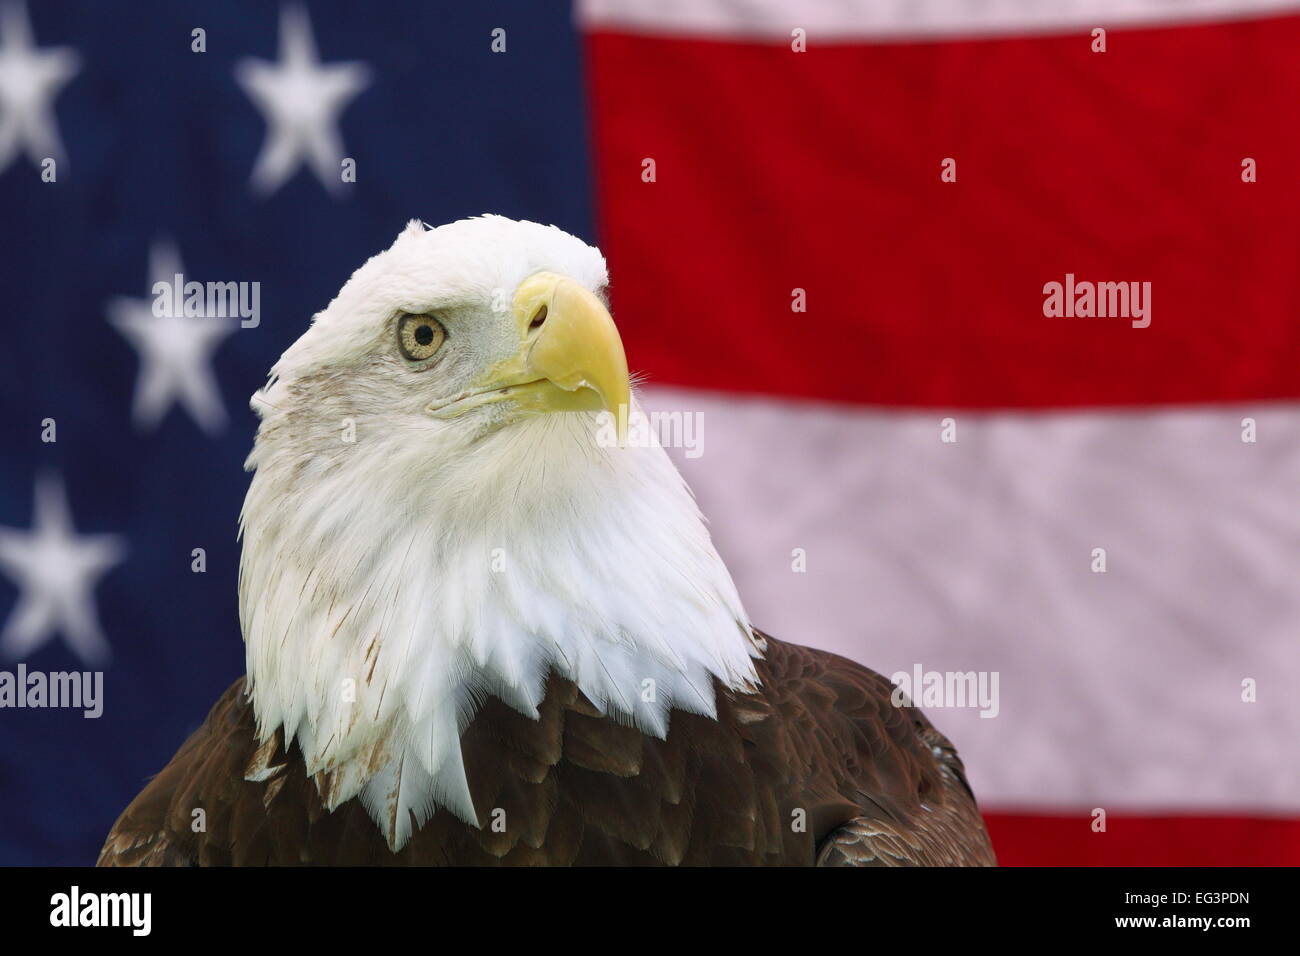 The iconic Bald Eagle (Haliaeetus leucocephalus) in front of the stars and stripes of the American flag in Texas, USA. Stock Photo